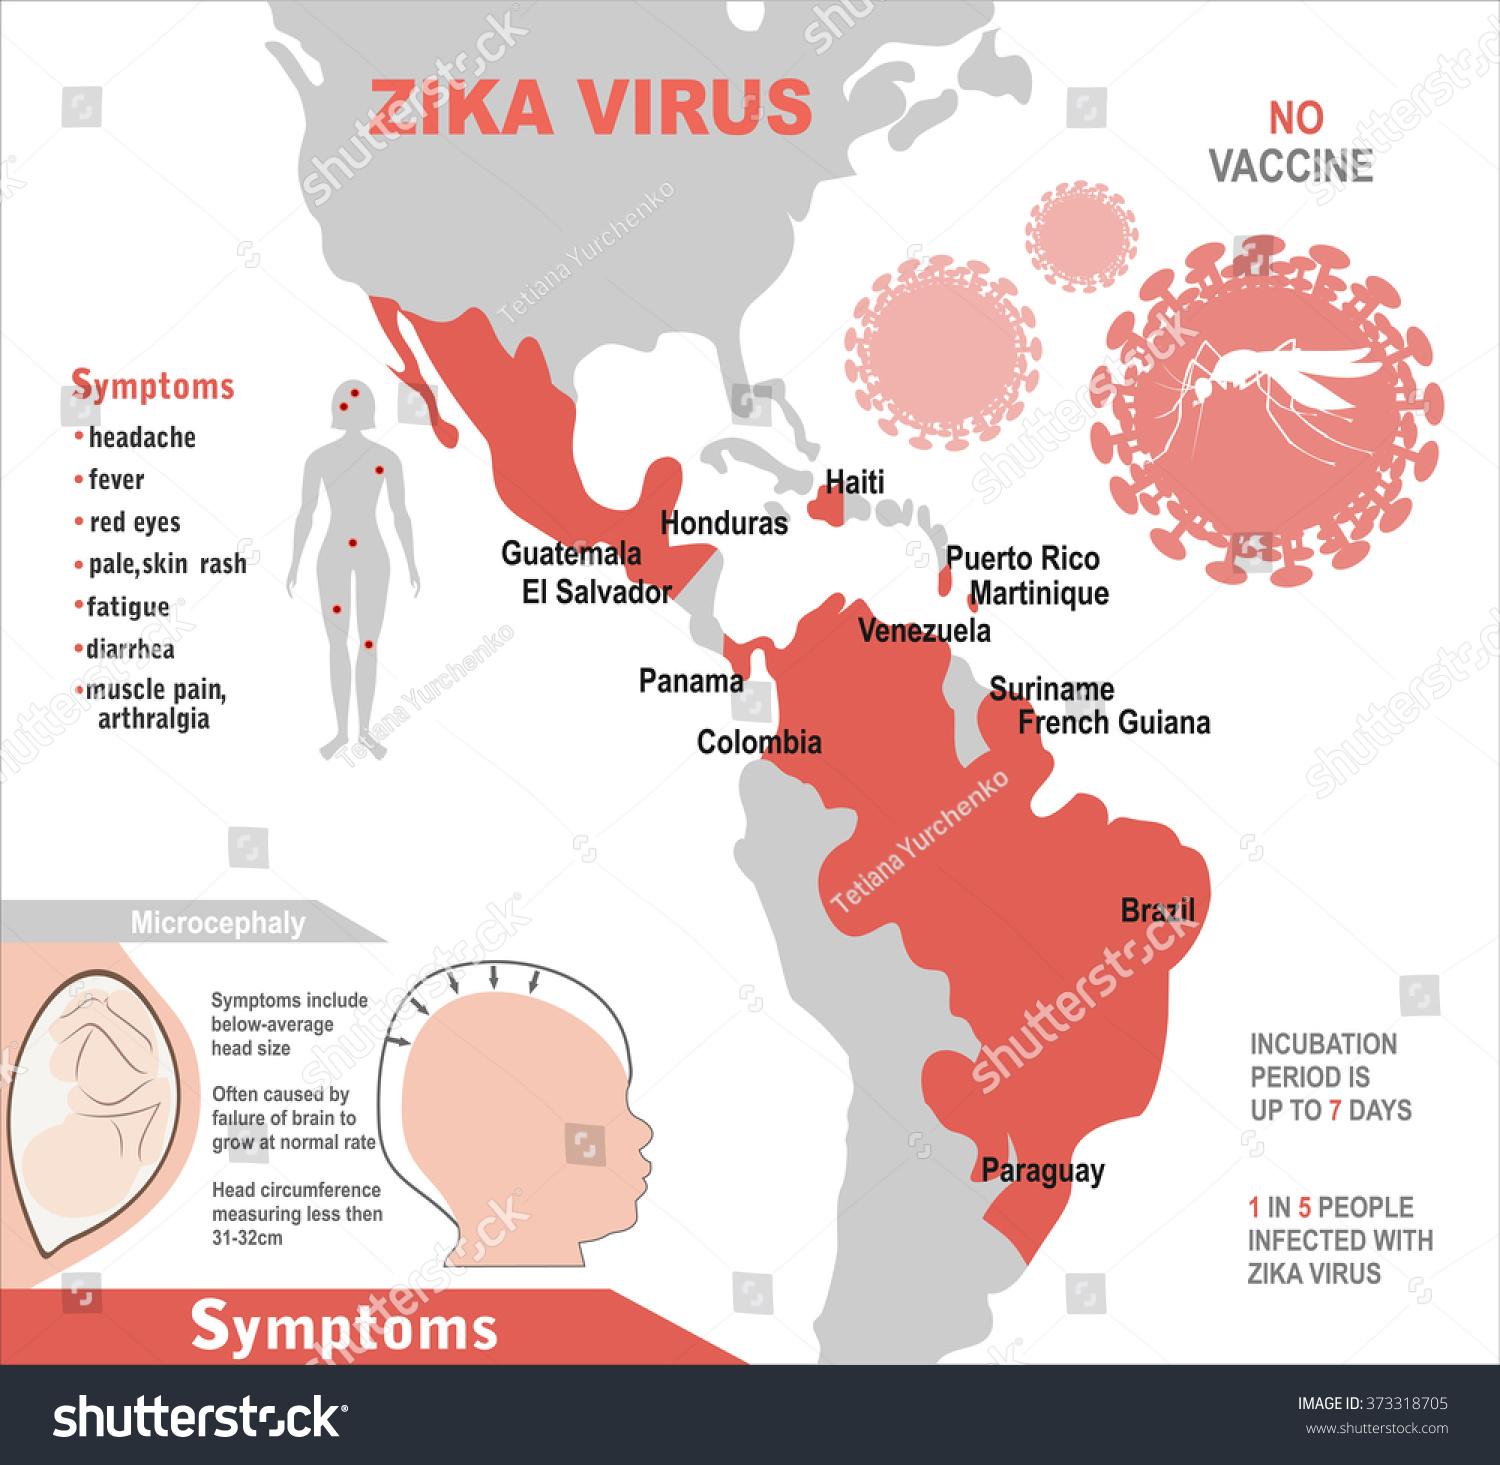 Zika Virus Infographic Elements Prevention Transmission Stock Vector Royalty Free 373318705 8805